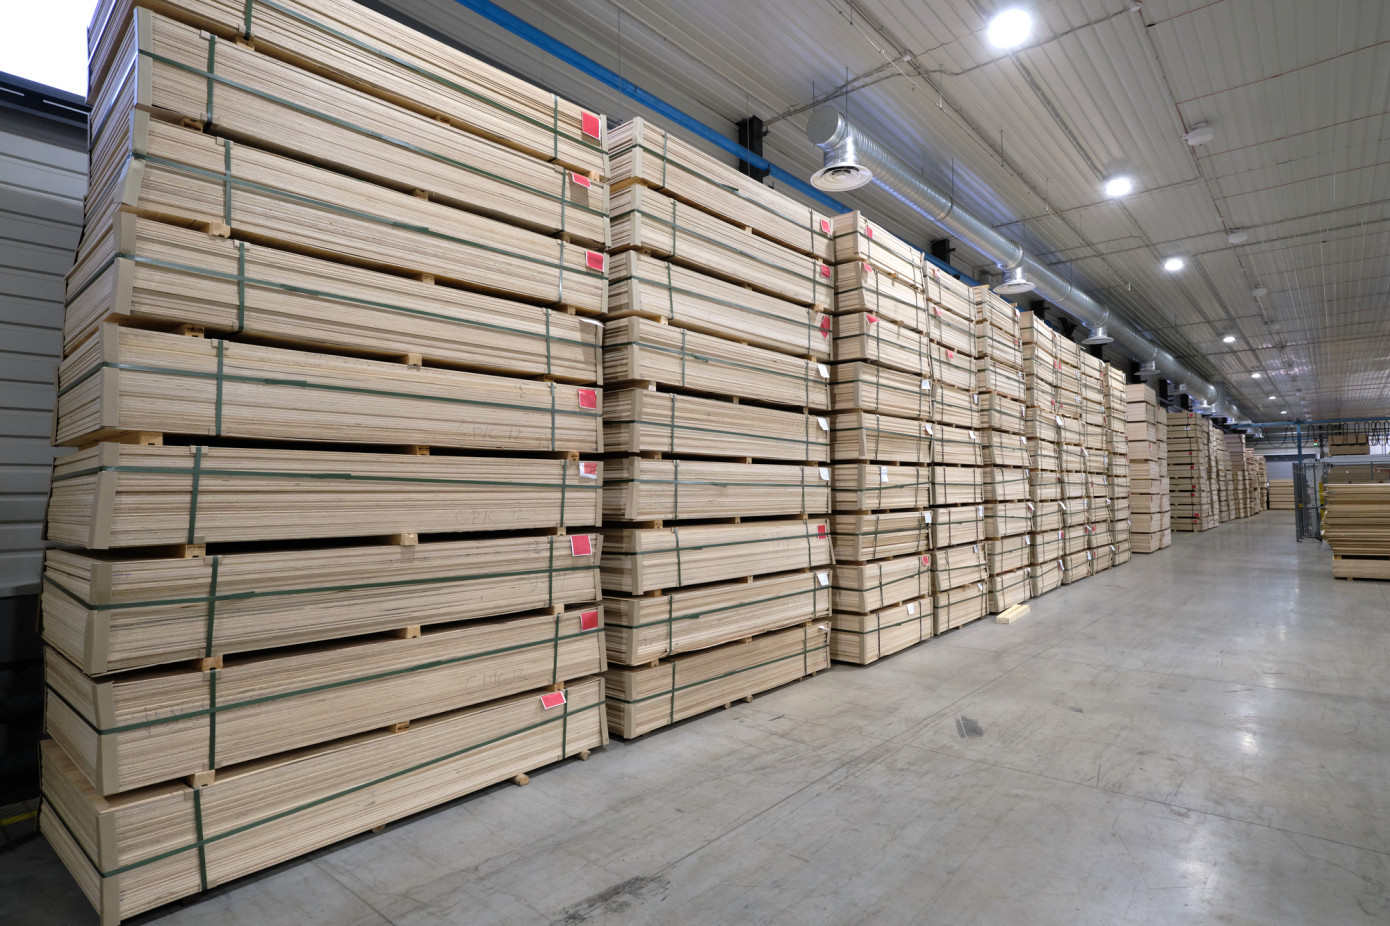 U.S. Department of Commerce rules on Vietnam-imported hardwood plywood circumvention case